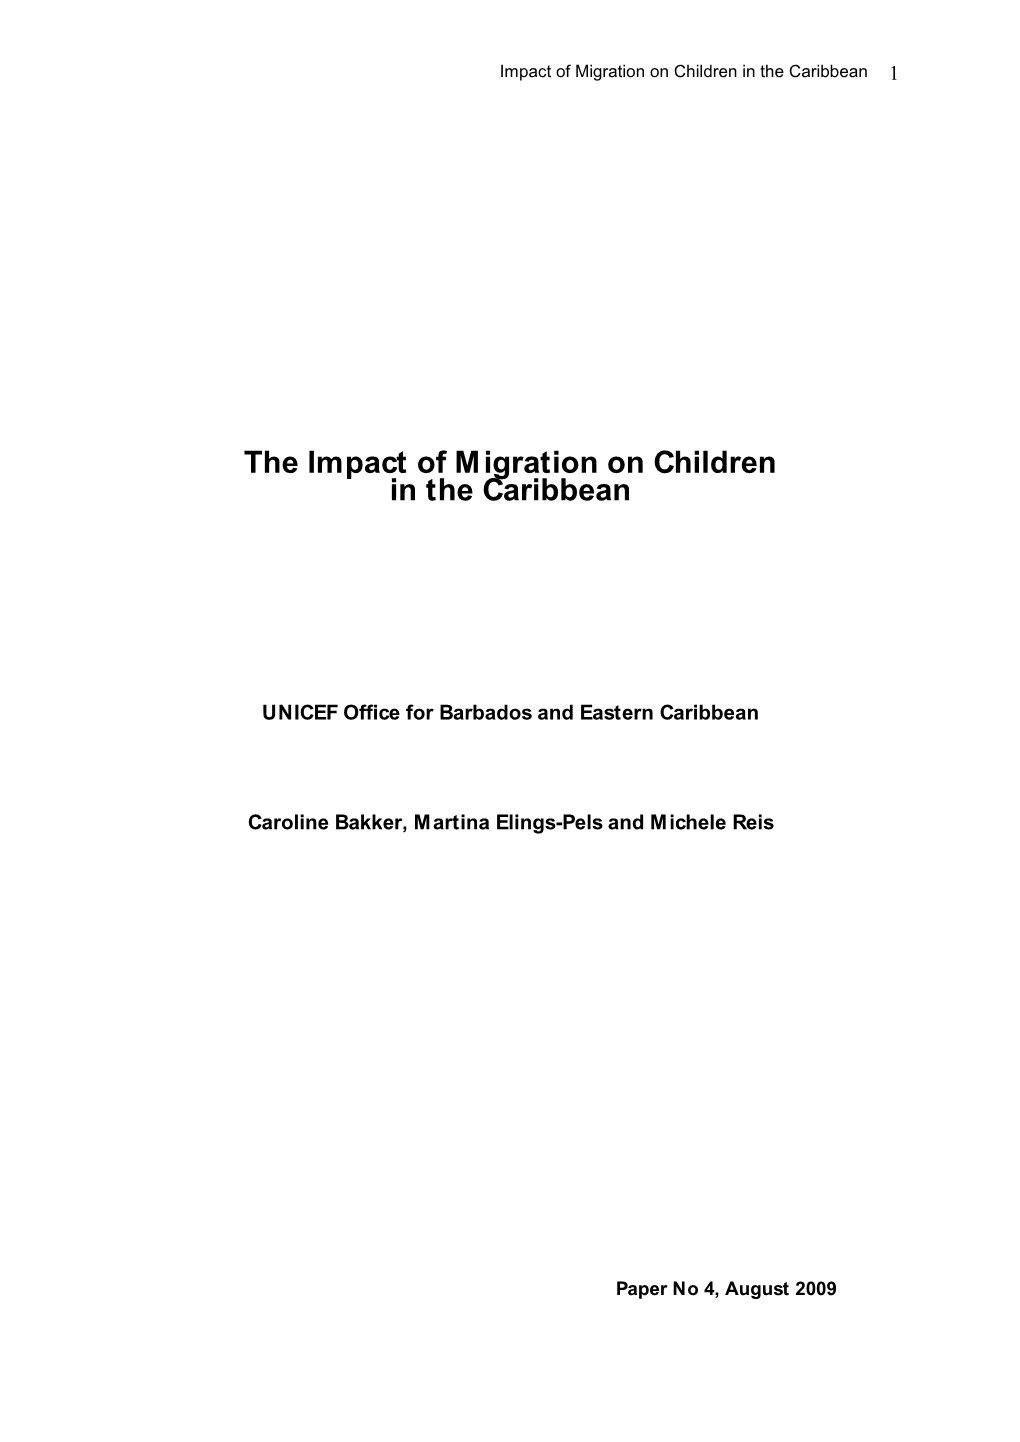 The Impact of Migartion on Children in the Caribbean